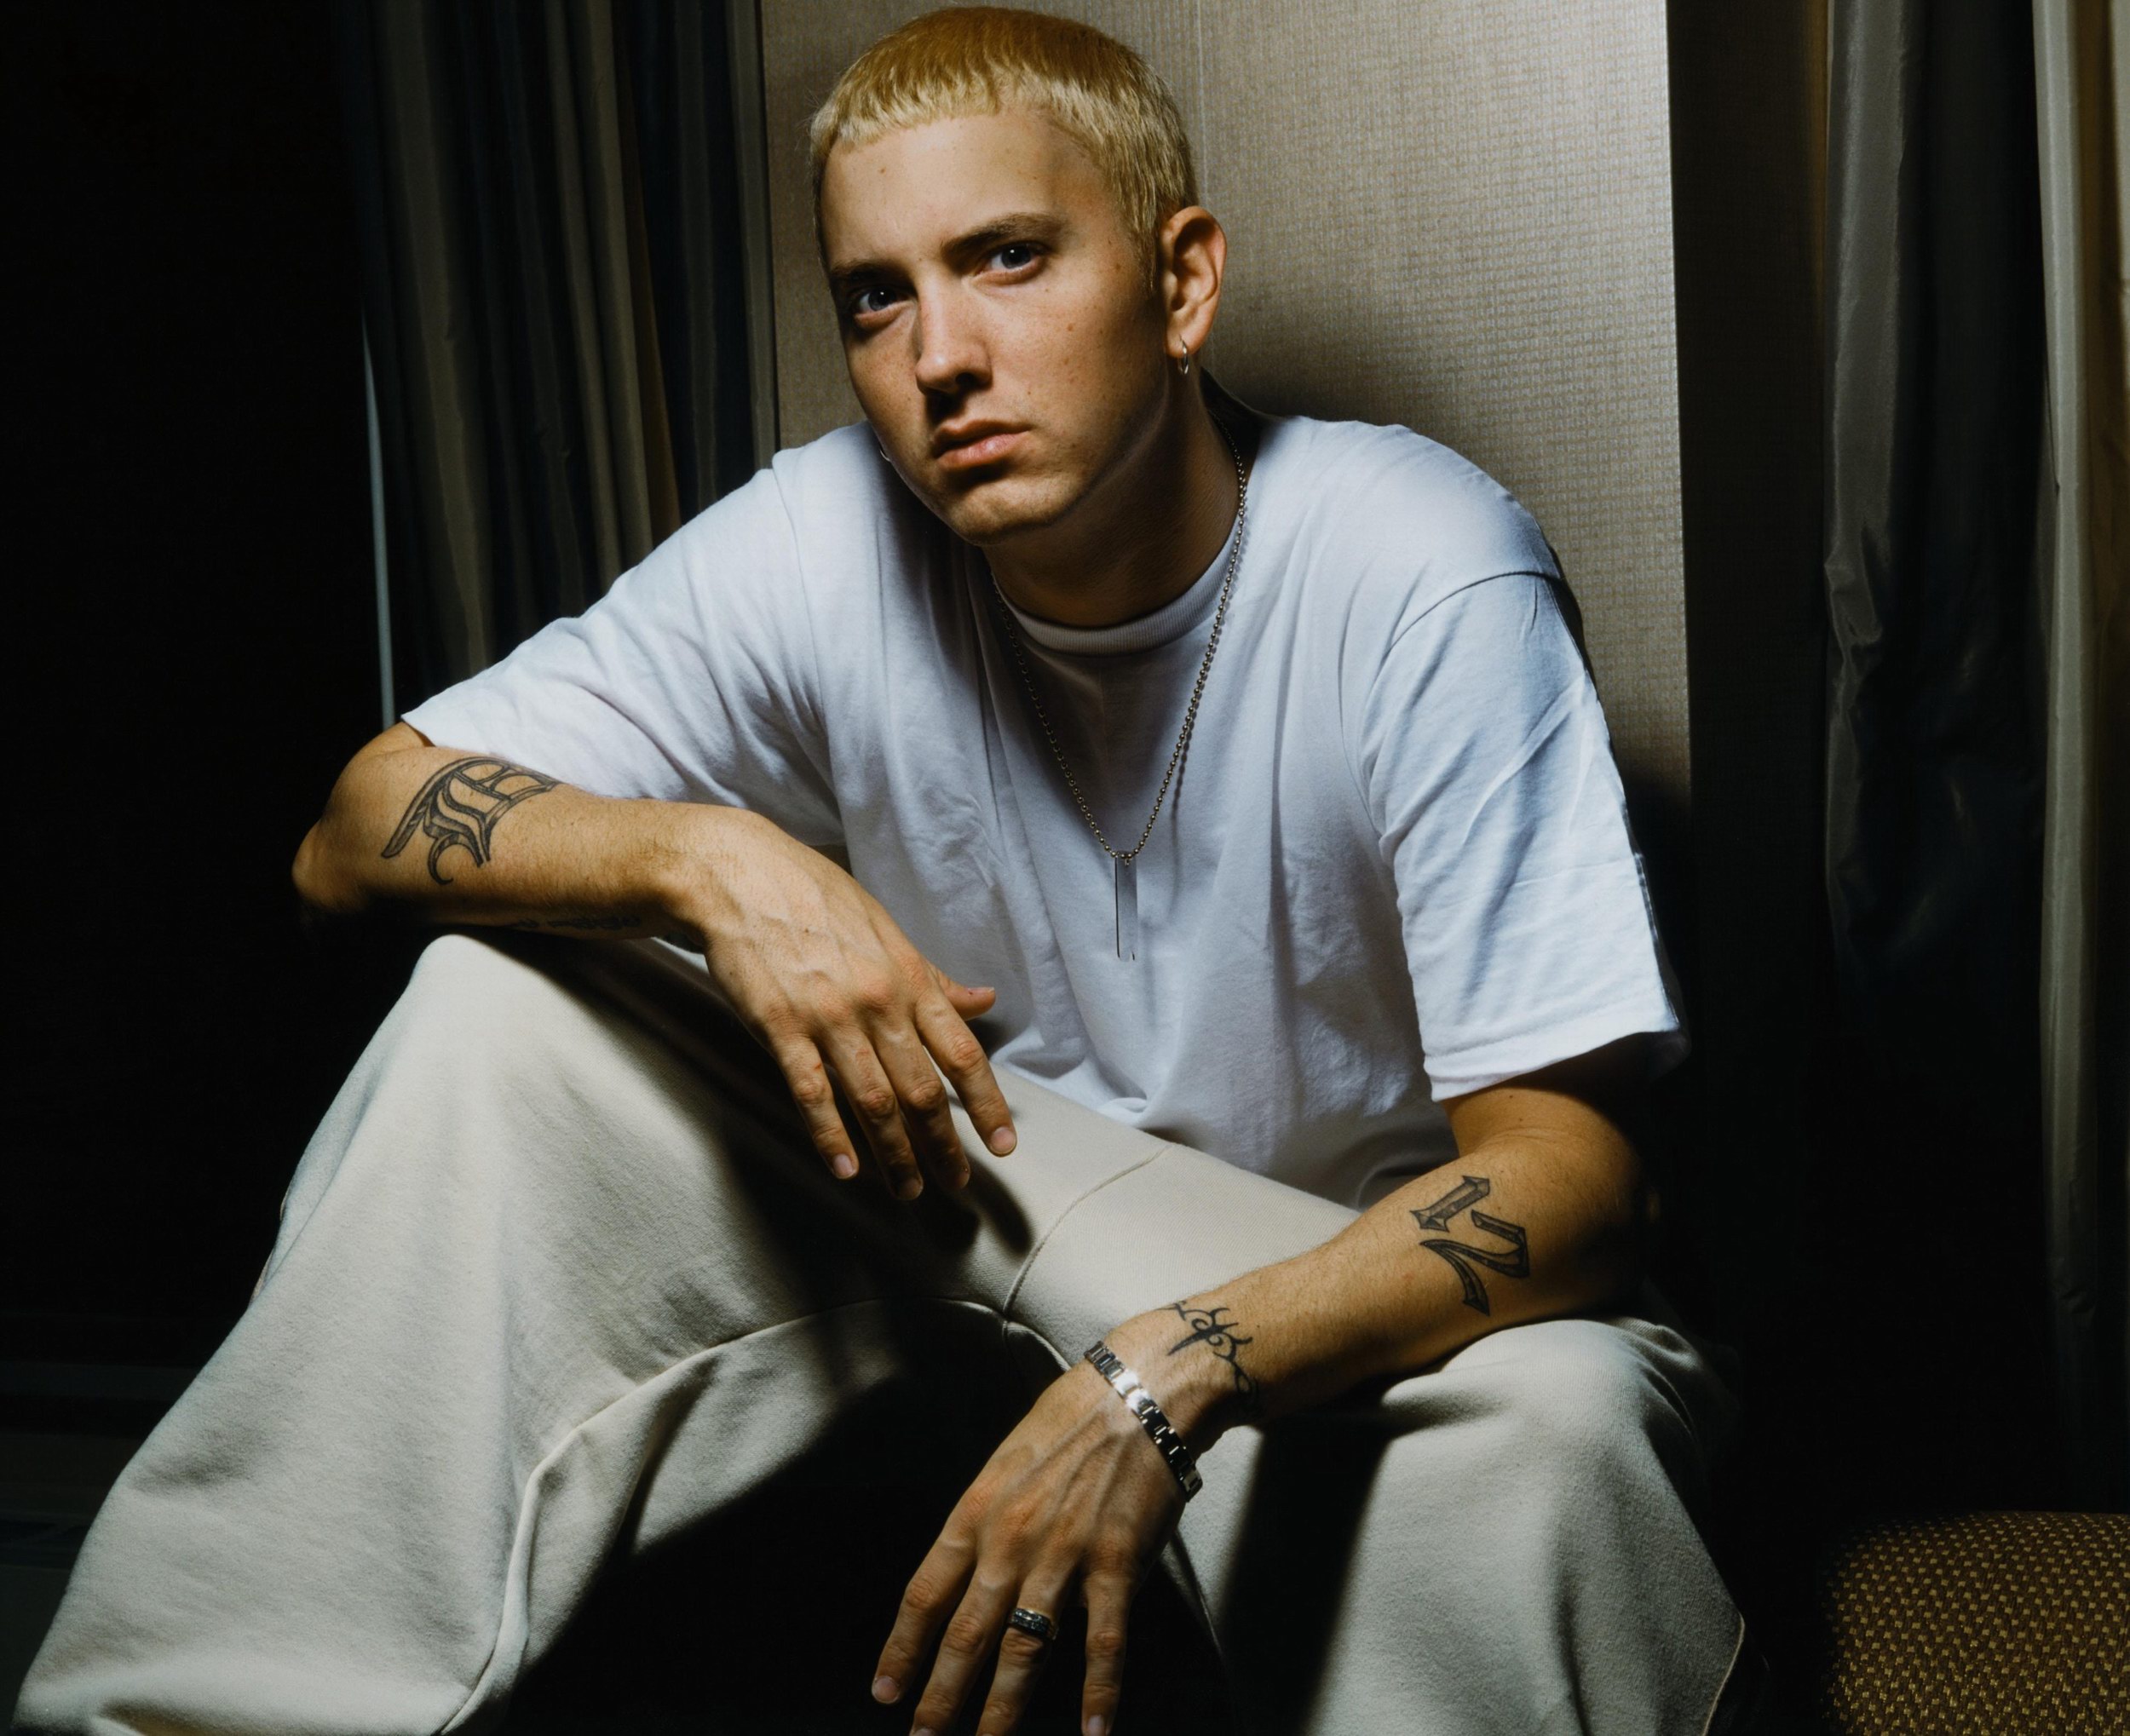 Eminem Isn’t “Gaunt and Haggard,” He’s Fit and Healthy